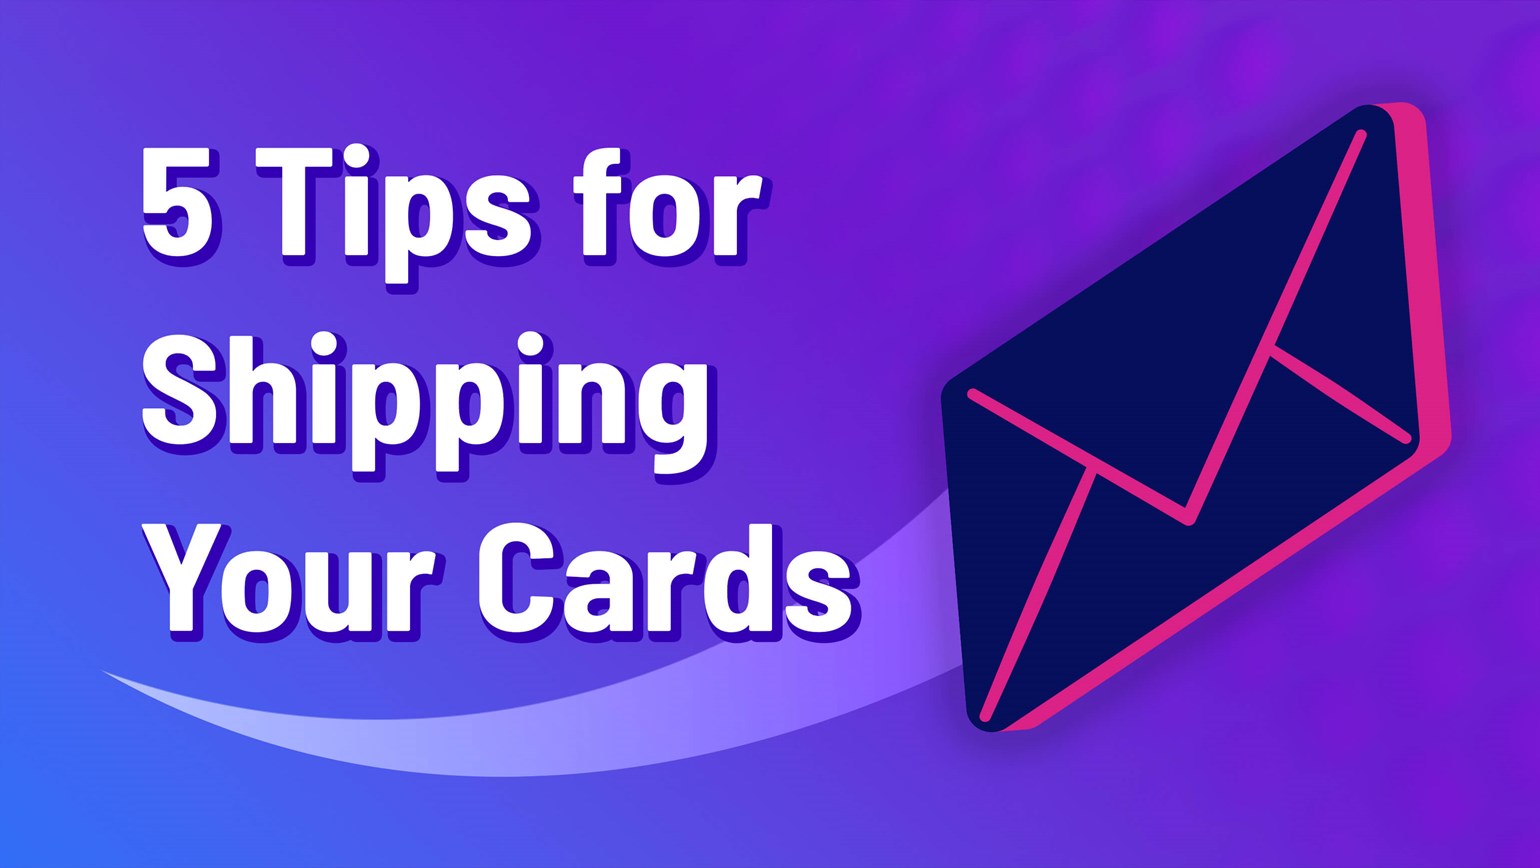 5 Tips for Shipping Your Direct, Store Your Products, and Sort Packages